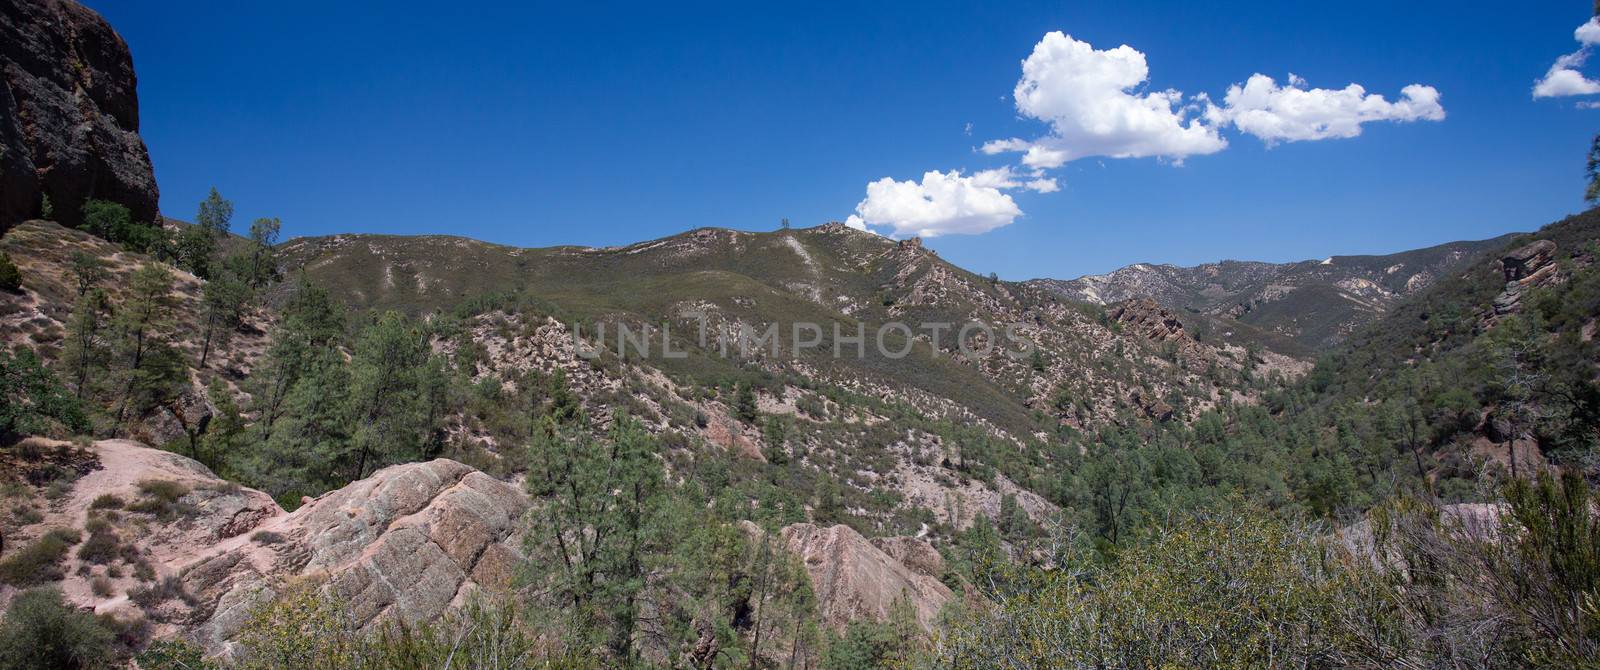 Panorama of Pinnacles National Park  by wolterk